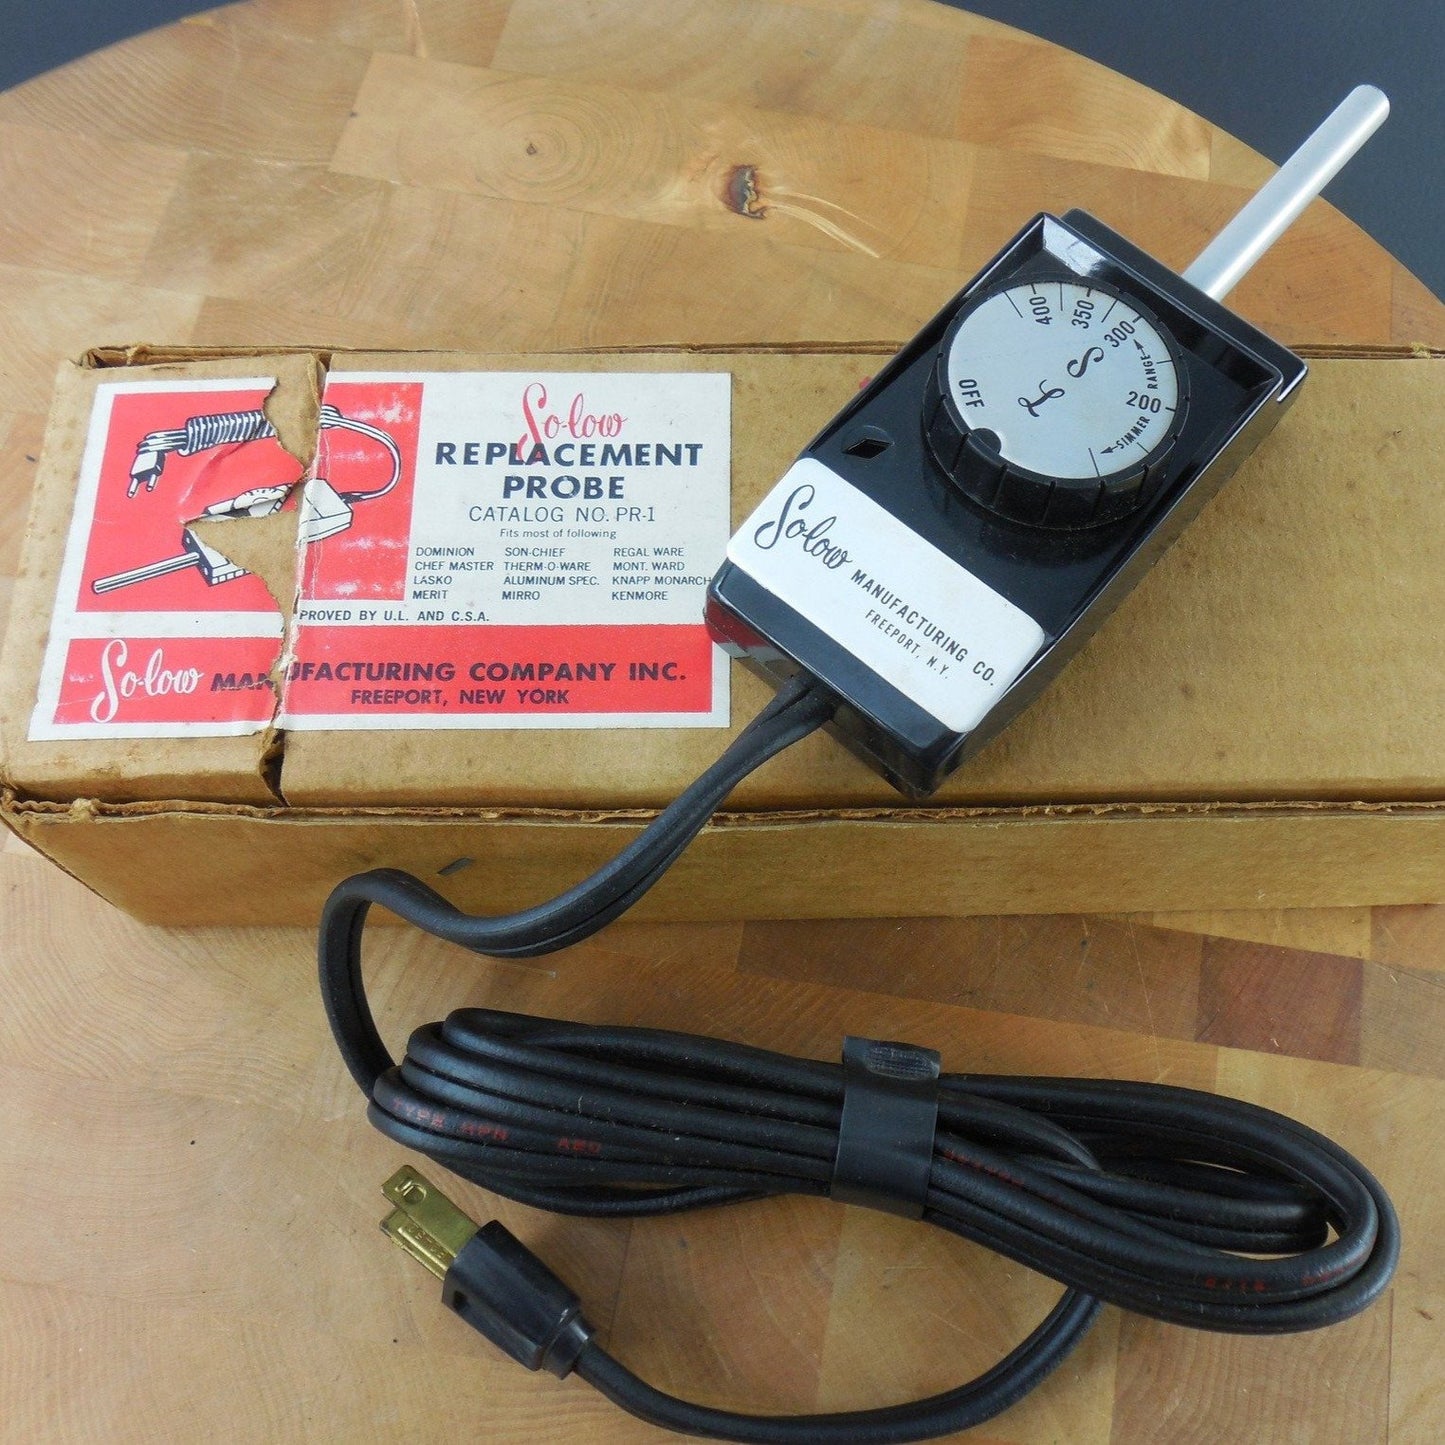 Vintage NOS New Old Stock - So-Low Generic Heat Control Power Supply - Replacement Probe Part 